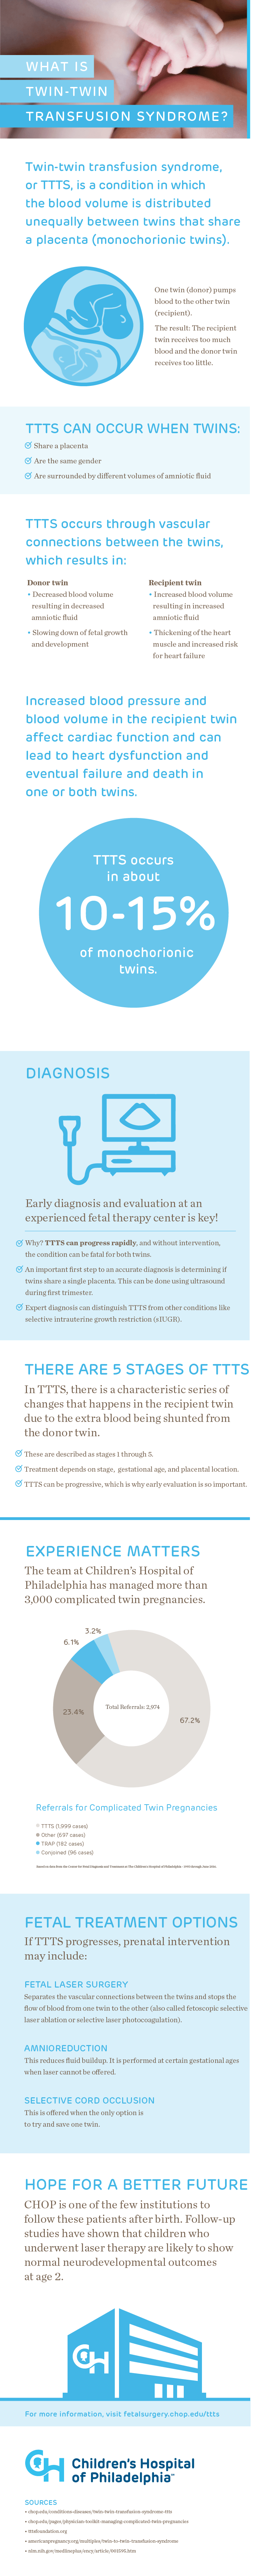 Fast Facts About Twin-twin Transfusion Syndrome Infographic